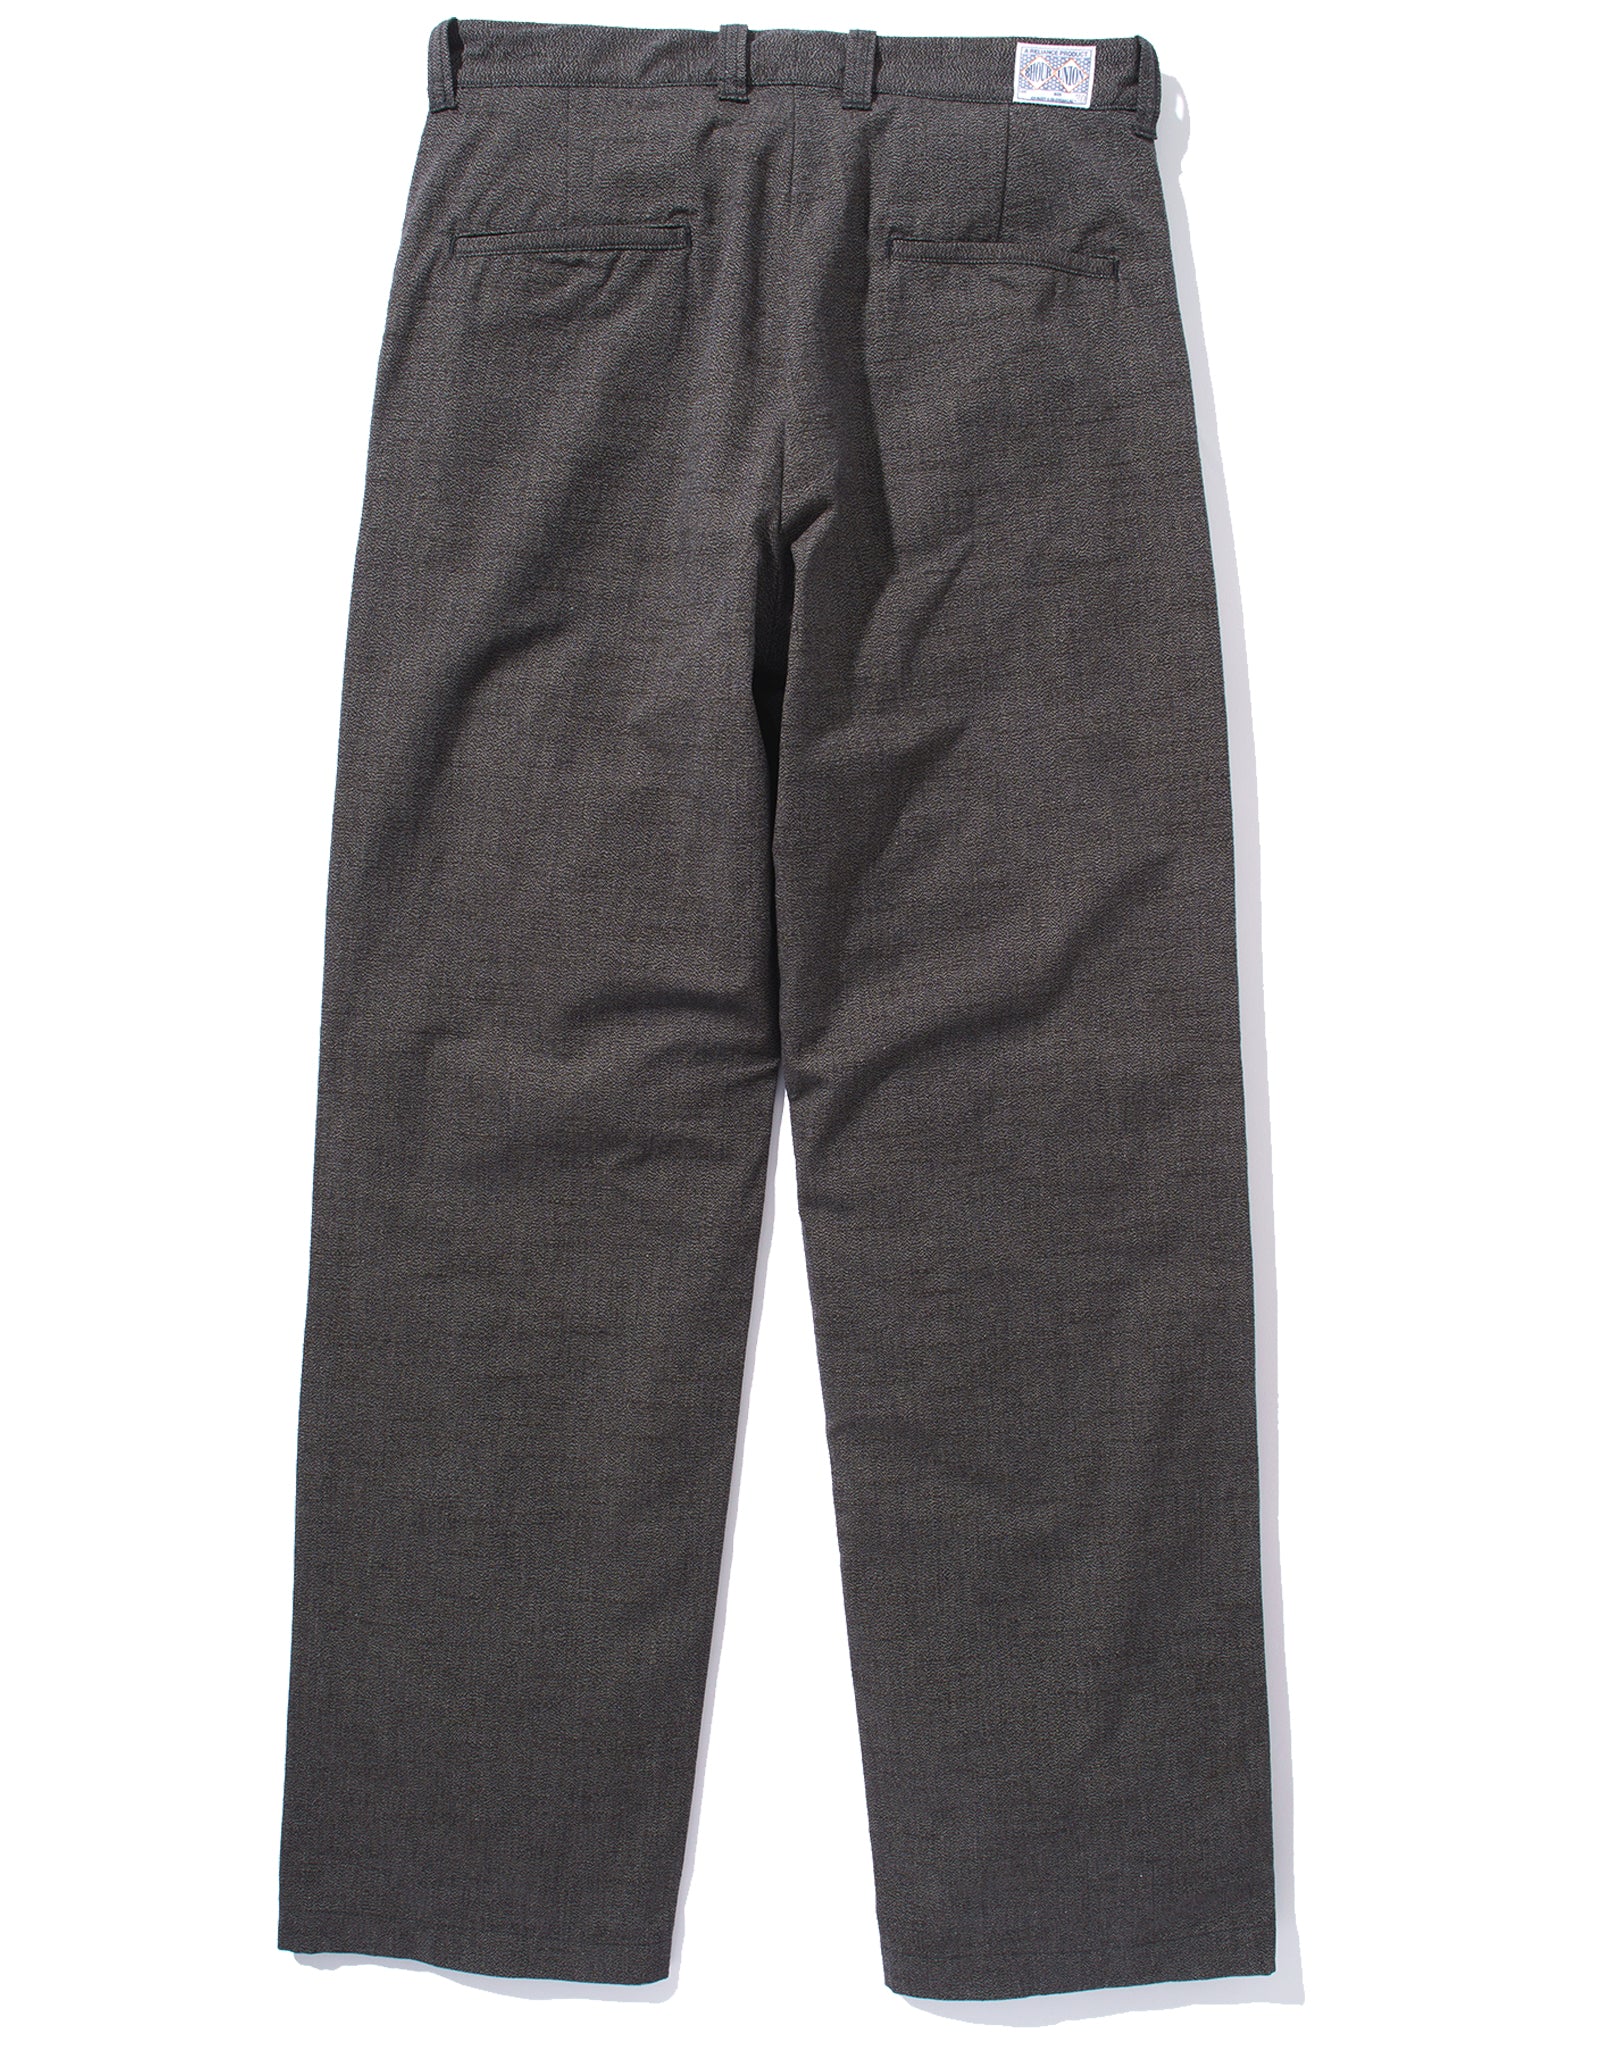 8HU CHAMBRAY TROUSERS – The Real McCoy's